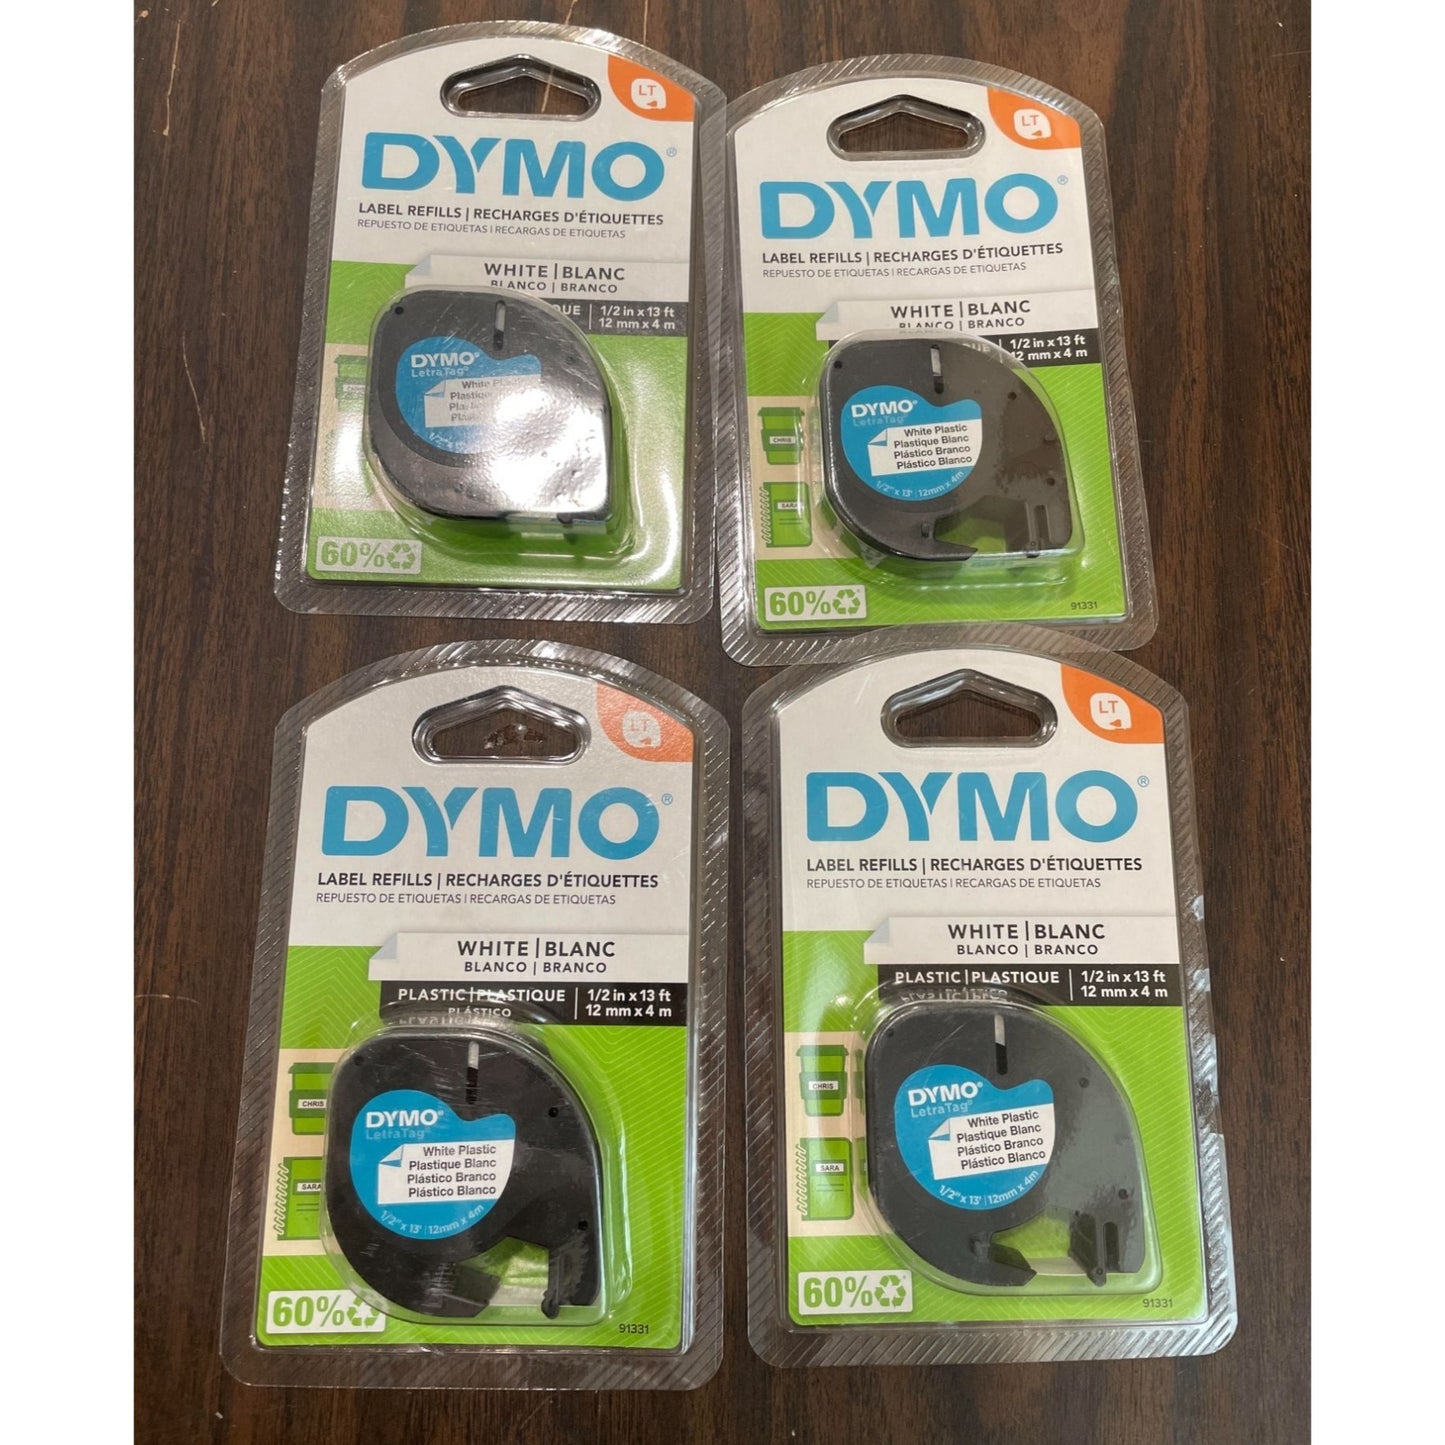 Dymo Label Maker with 7 Label Refills (All Brand New!)